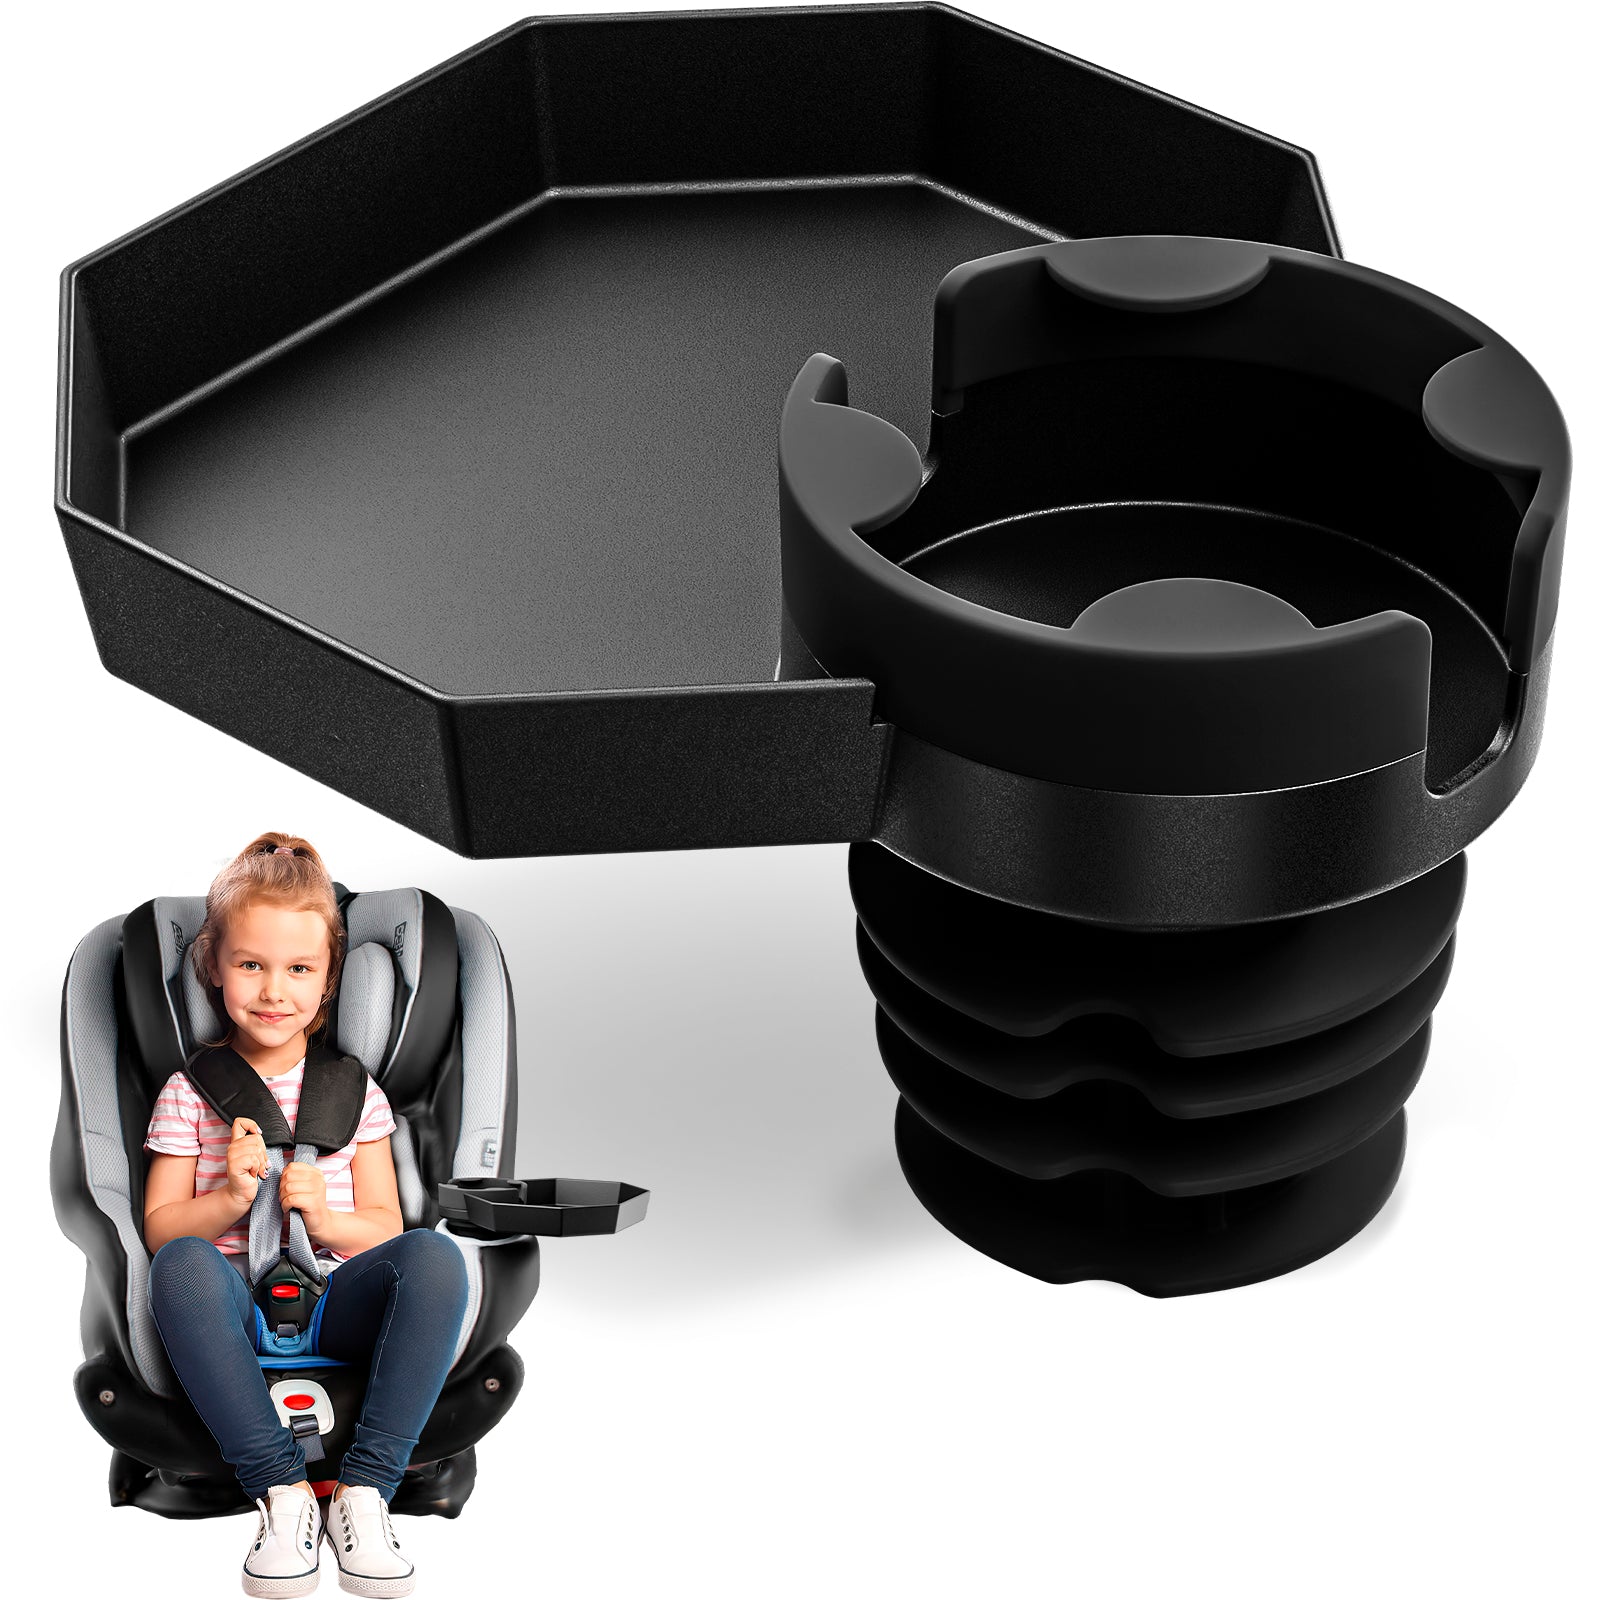 Kids Travel Tray - Car Seat Cup Holder Tray Standard Base